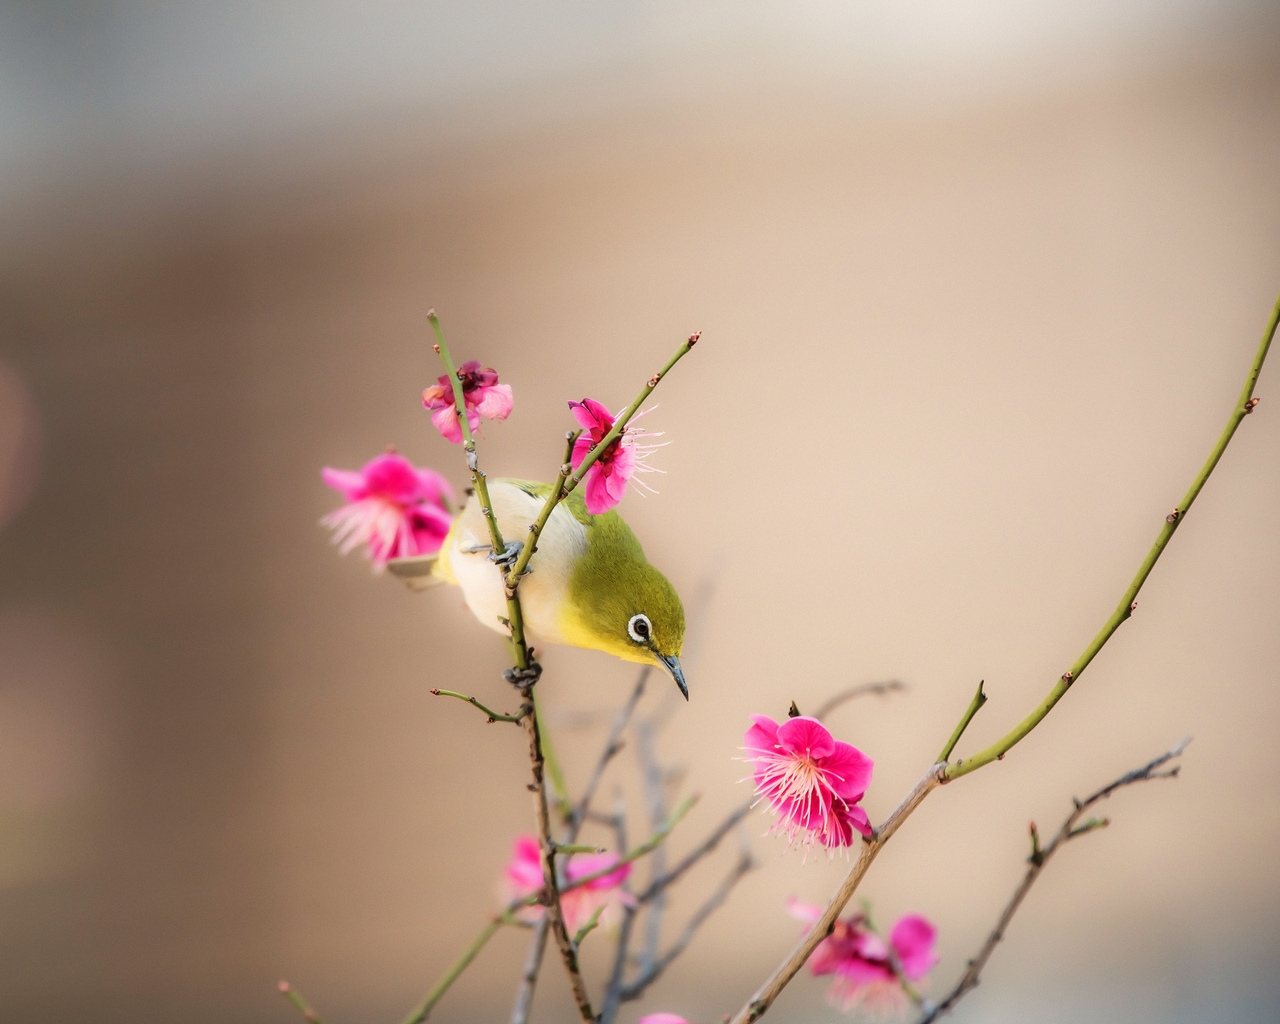 Little Bird on a Branch for 1280 x 1024 resolution